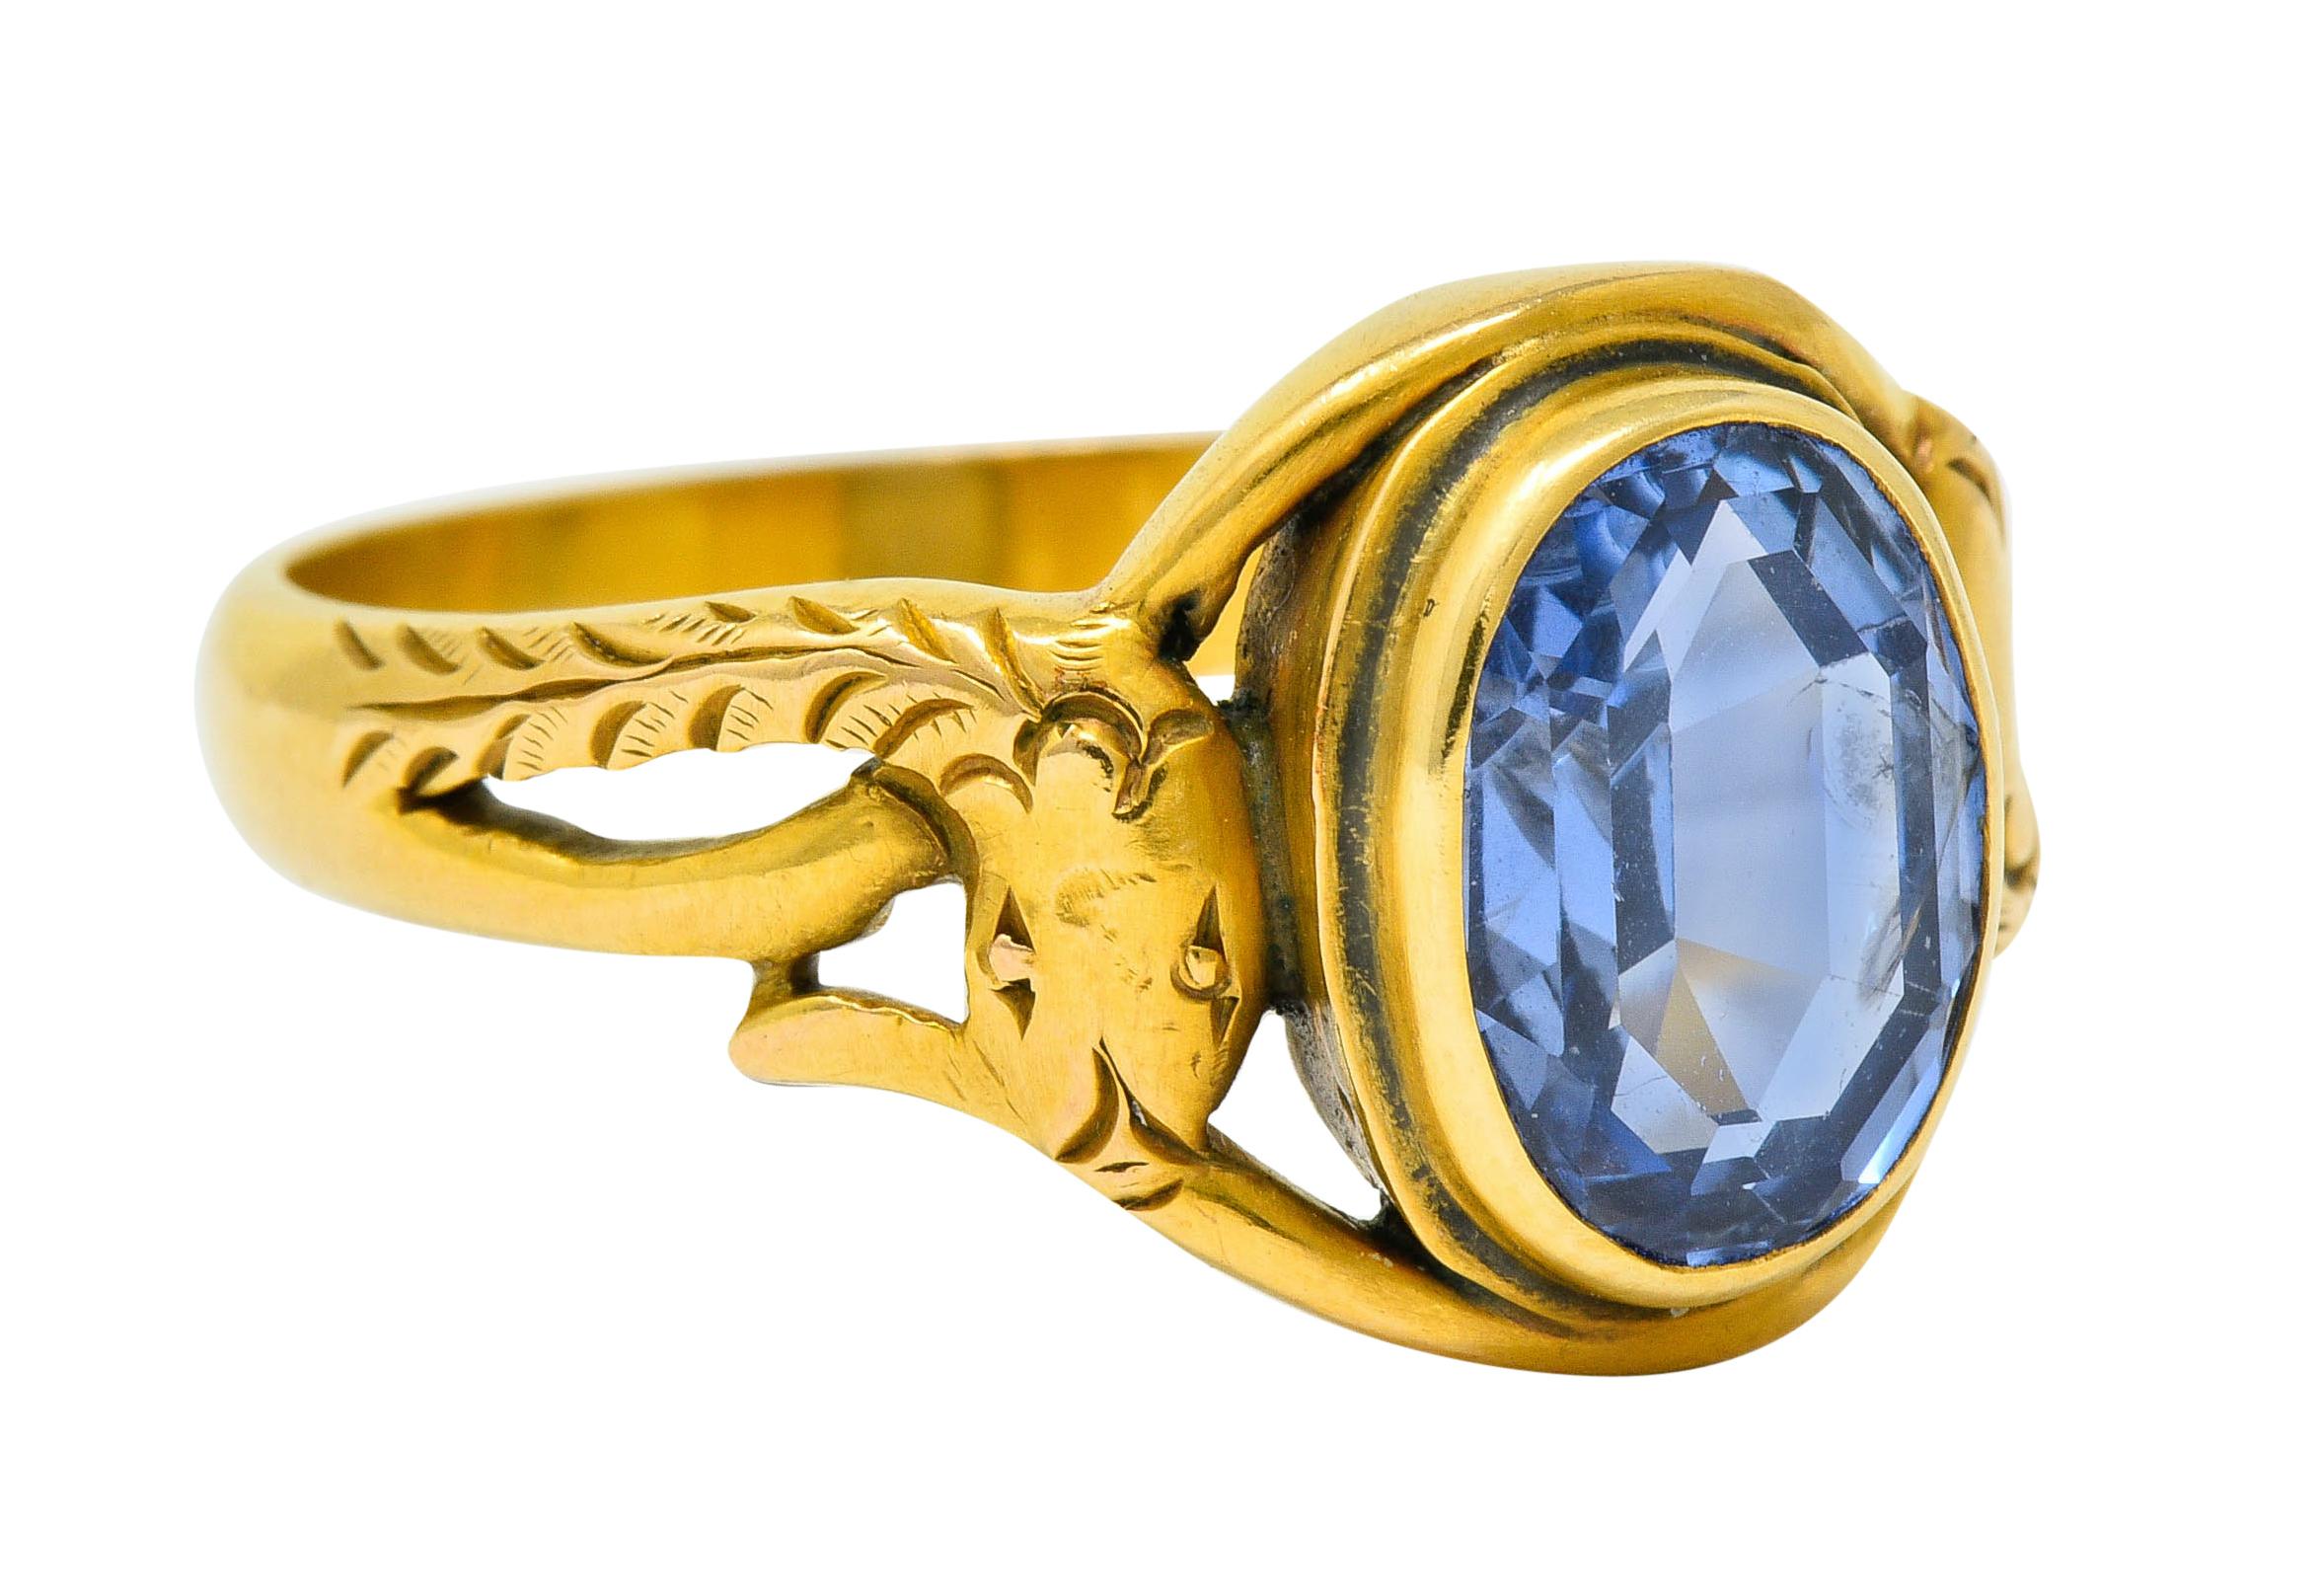 Centering on oval mixed cut Ceylon sapphire with unique octagonal faceting and weighs approximately 3.50 carats

Transparent and light blue in color with no indications of heat; Sri Lankan in origin

Bezel set in a matte gold mounting designed as